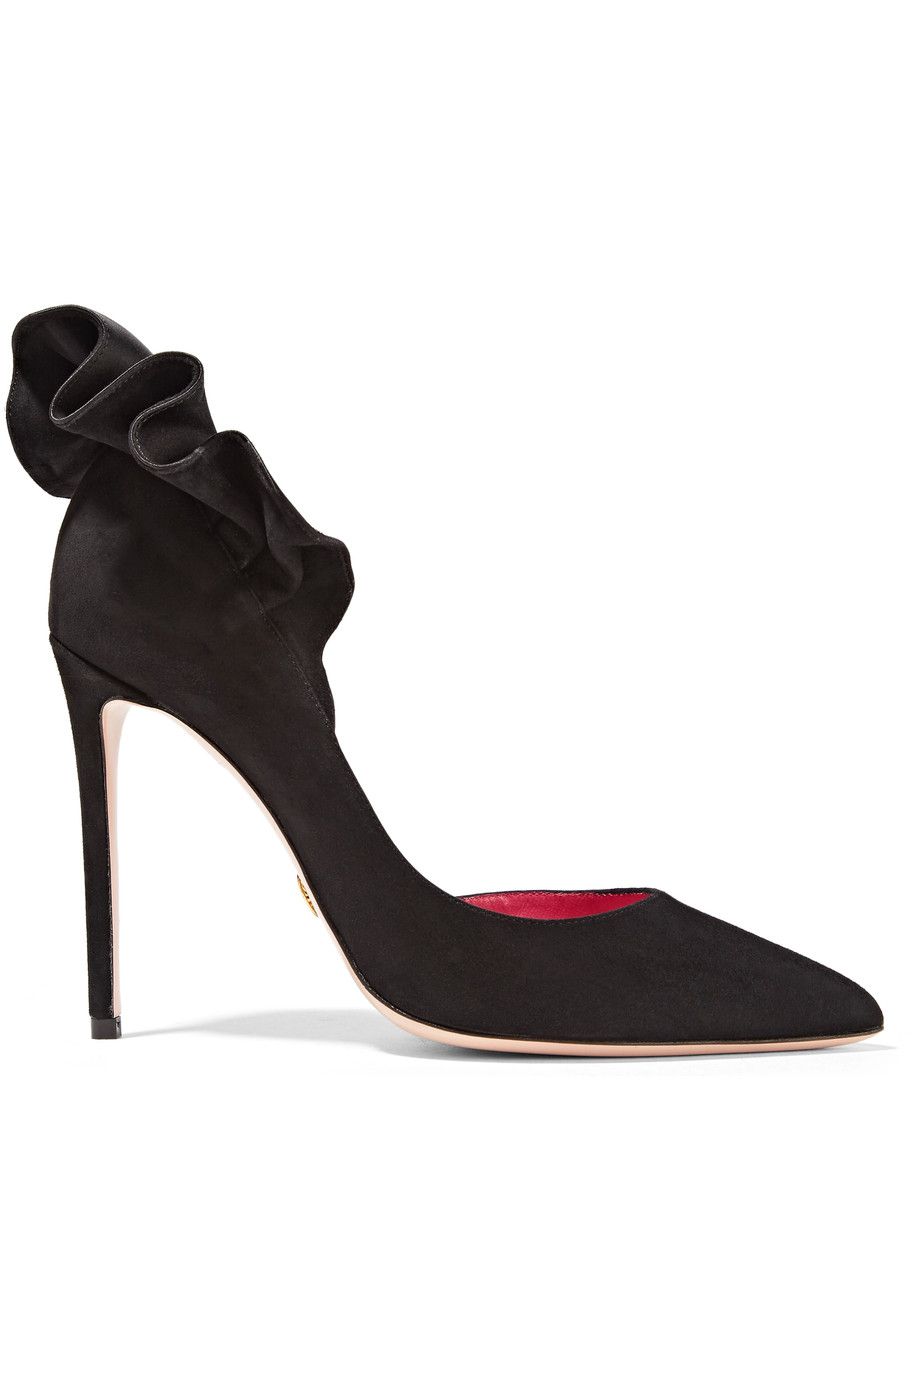 Adele ruffle-trimmed suede pumps